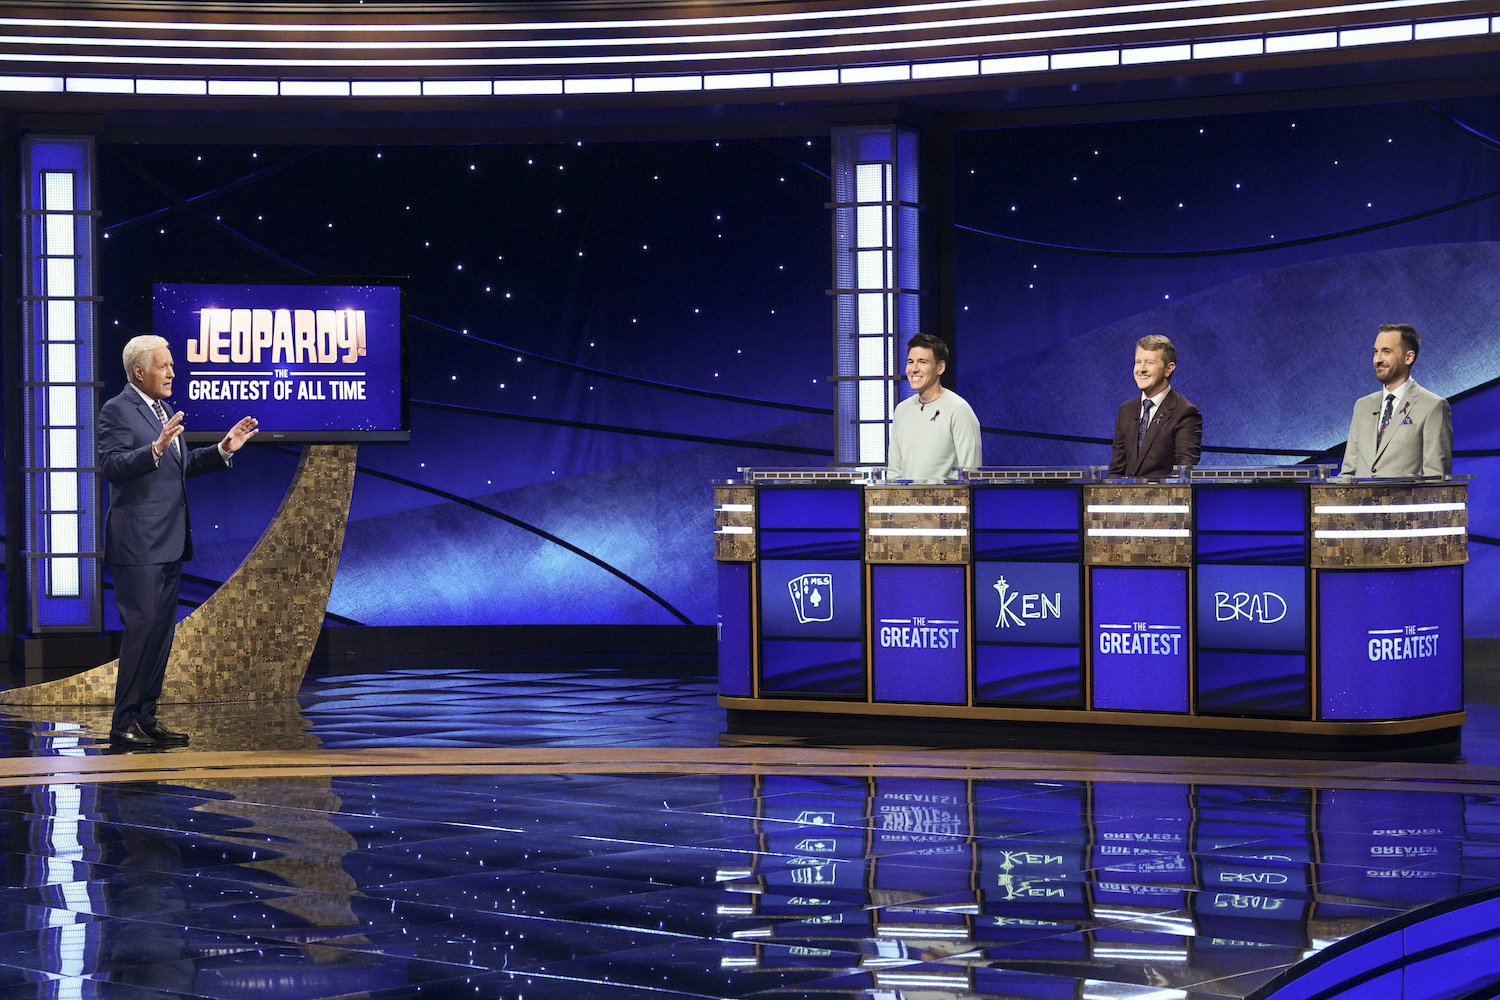 What is Smash Hit? Jeopardy Debuts to 14.4 Million Viewers on ABC